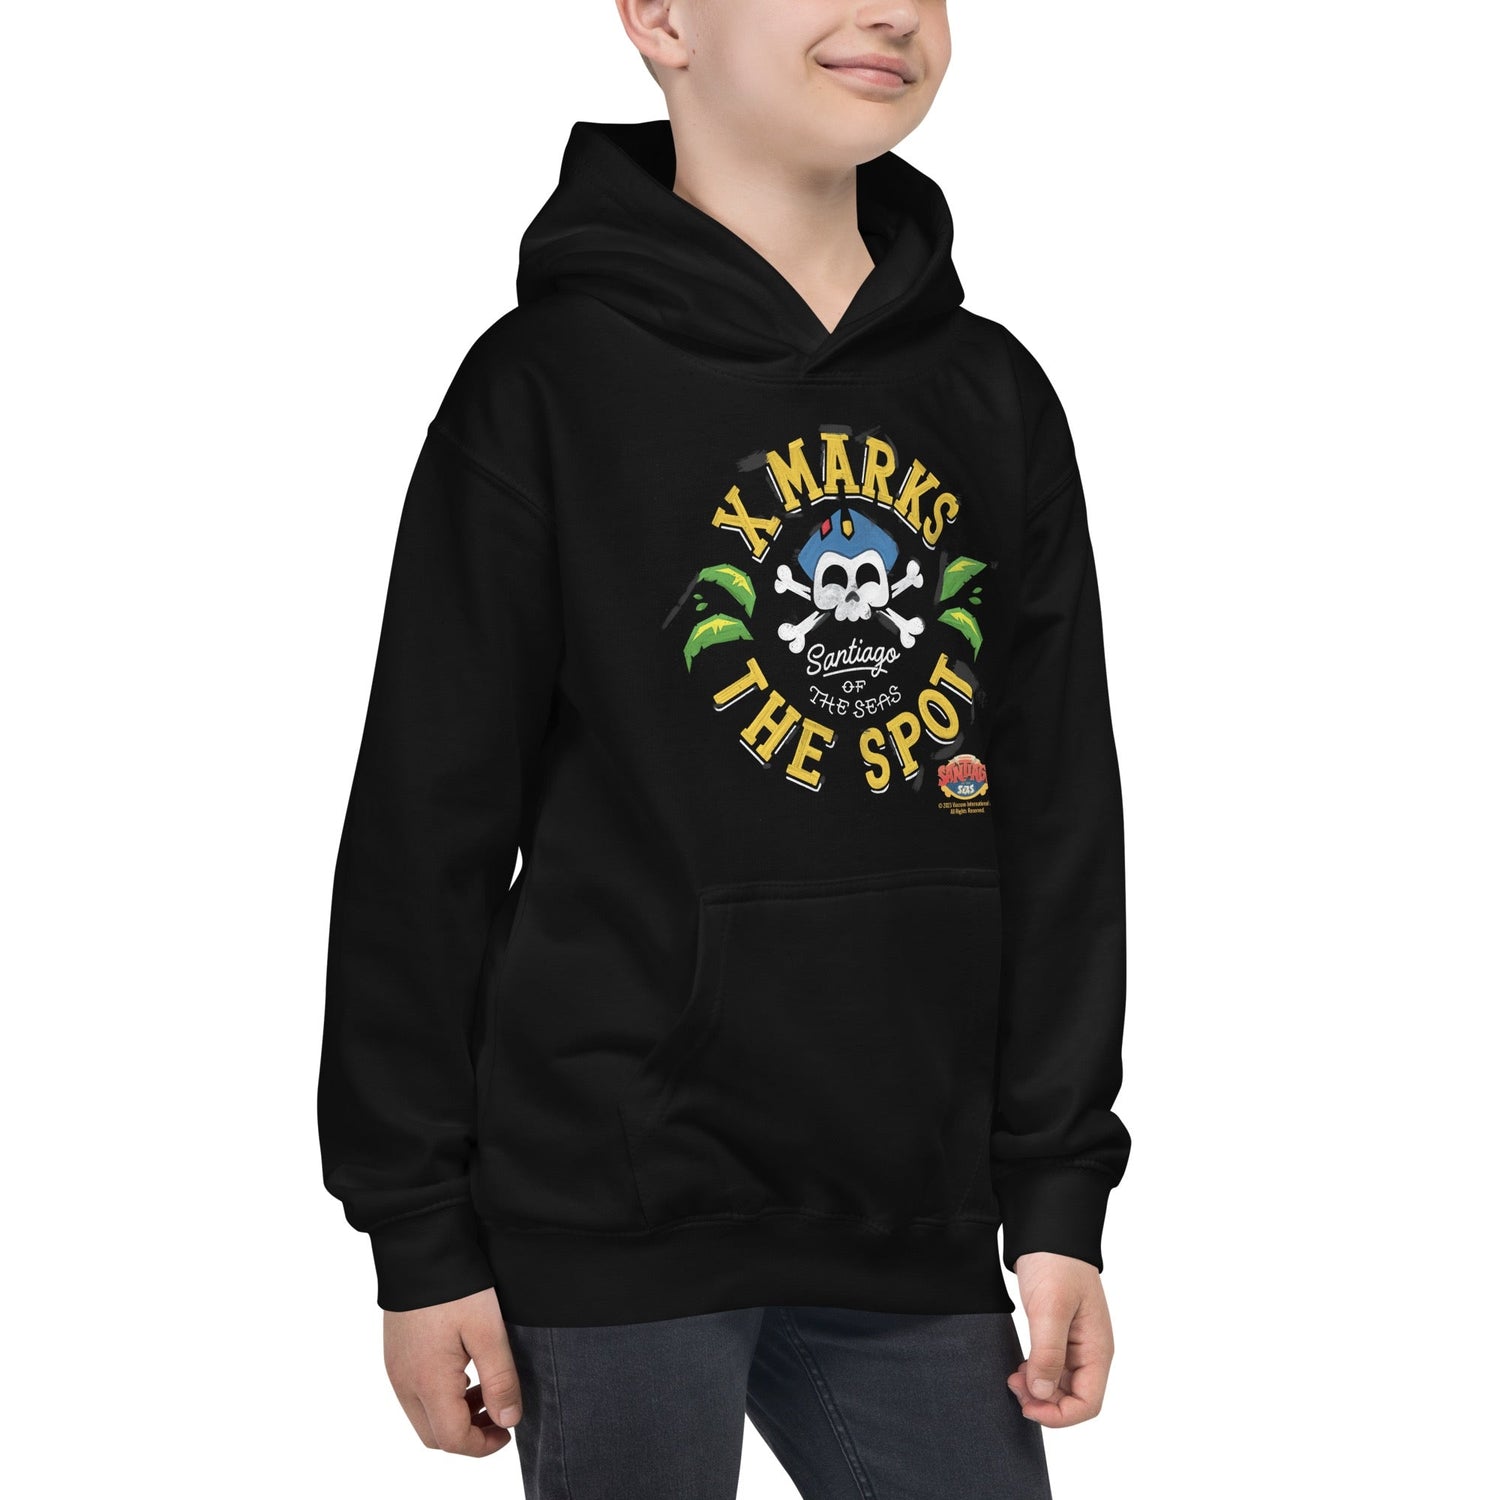 Santiago of the Seas X Marks The Spot Youth Hooded Sweatshirt - Paramount Shop